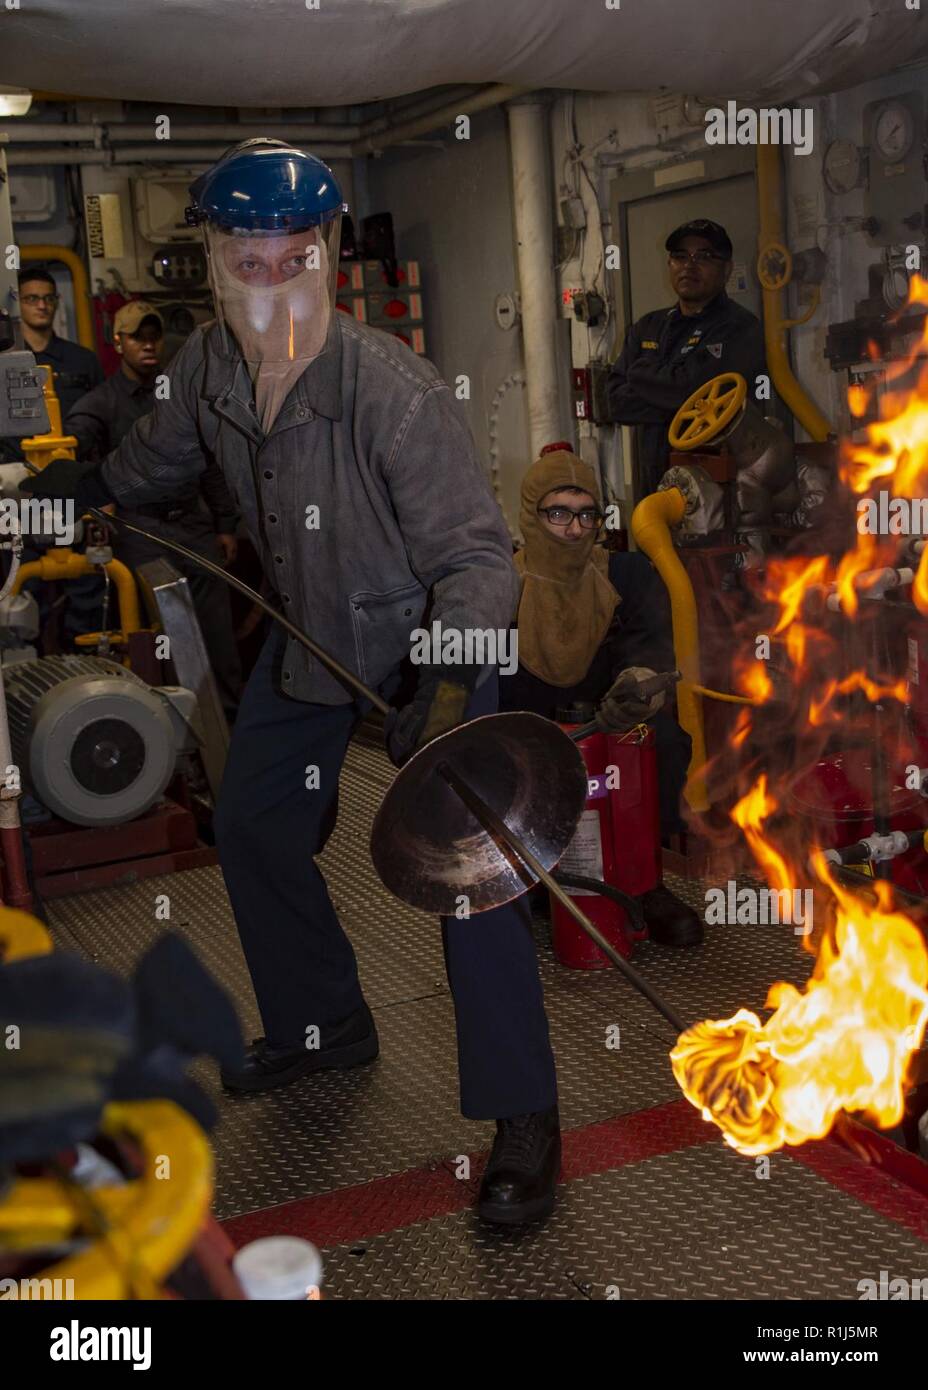 SAN FRANCISCO (Oct. 4, 2018) Capt. Gregory Thoroman, executive officer of the amphibious assault ship USS Bonhomme Richard (LHD 6), prepares to ignite the No.1 boiler in the aft main machinery room during San Francisco Fleet Week 2018. San Francisco Fleet Week is an opportunity for the American public to meet their Navy, Marine Corps and Coast Guard teams and experience America’s sea services. During fleet week, service members participate in various community service events, showcase capabilities and equipment to the community, and enjoy the hospitality of San Francisco and its surrounding ar Stock Photo